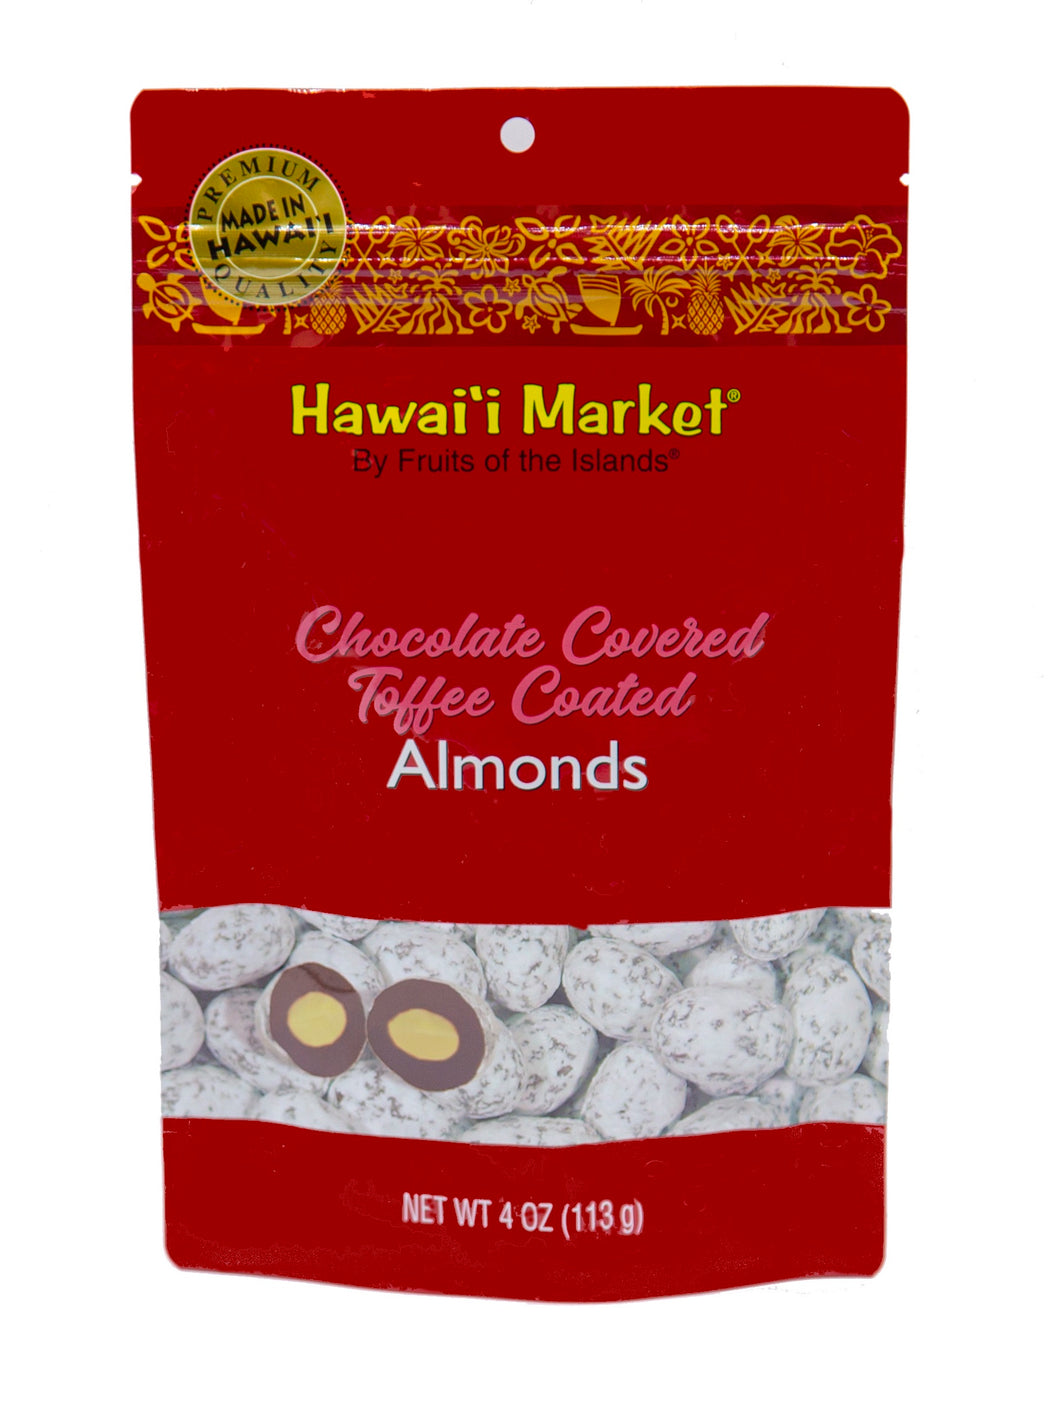 Chocolate Covered Toffee Coated Almonds